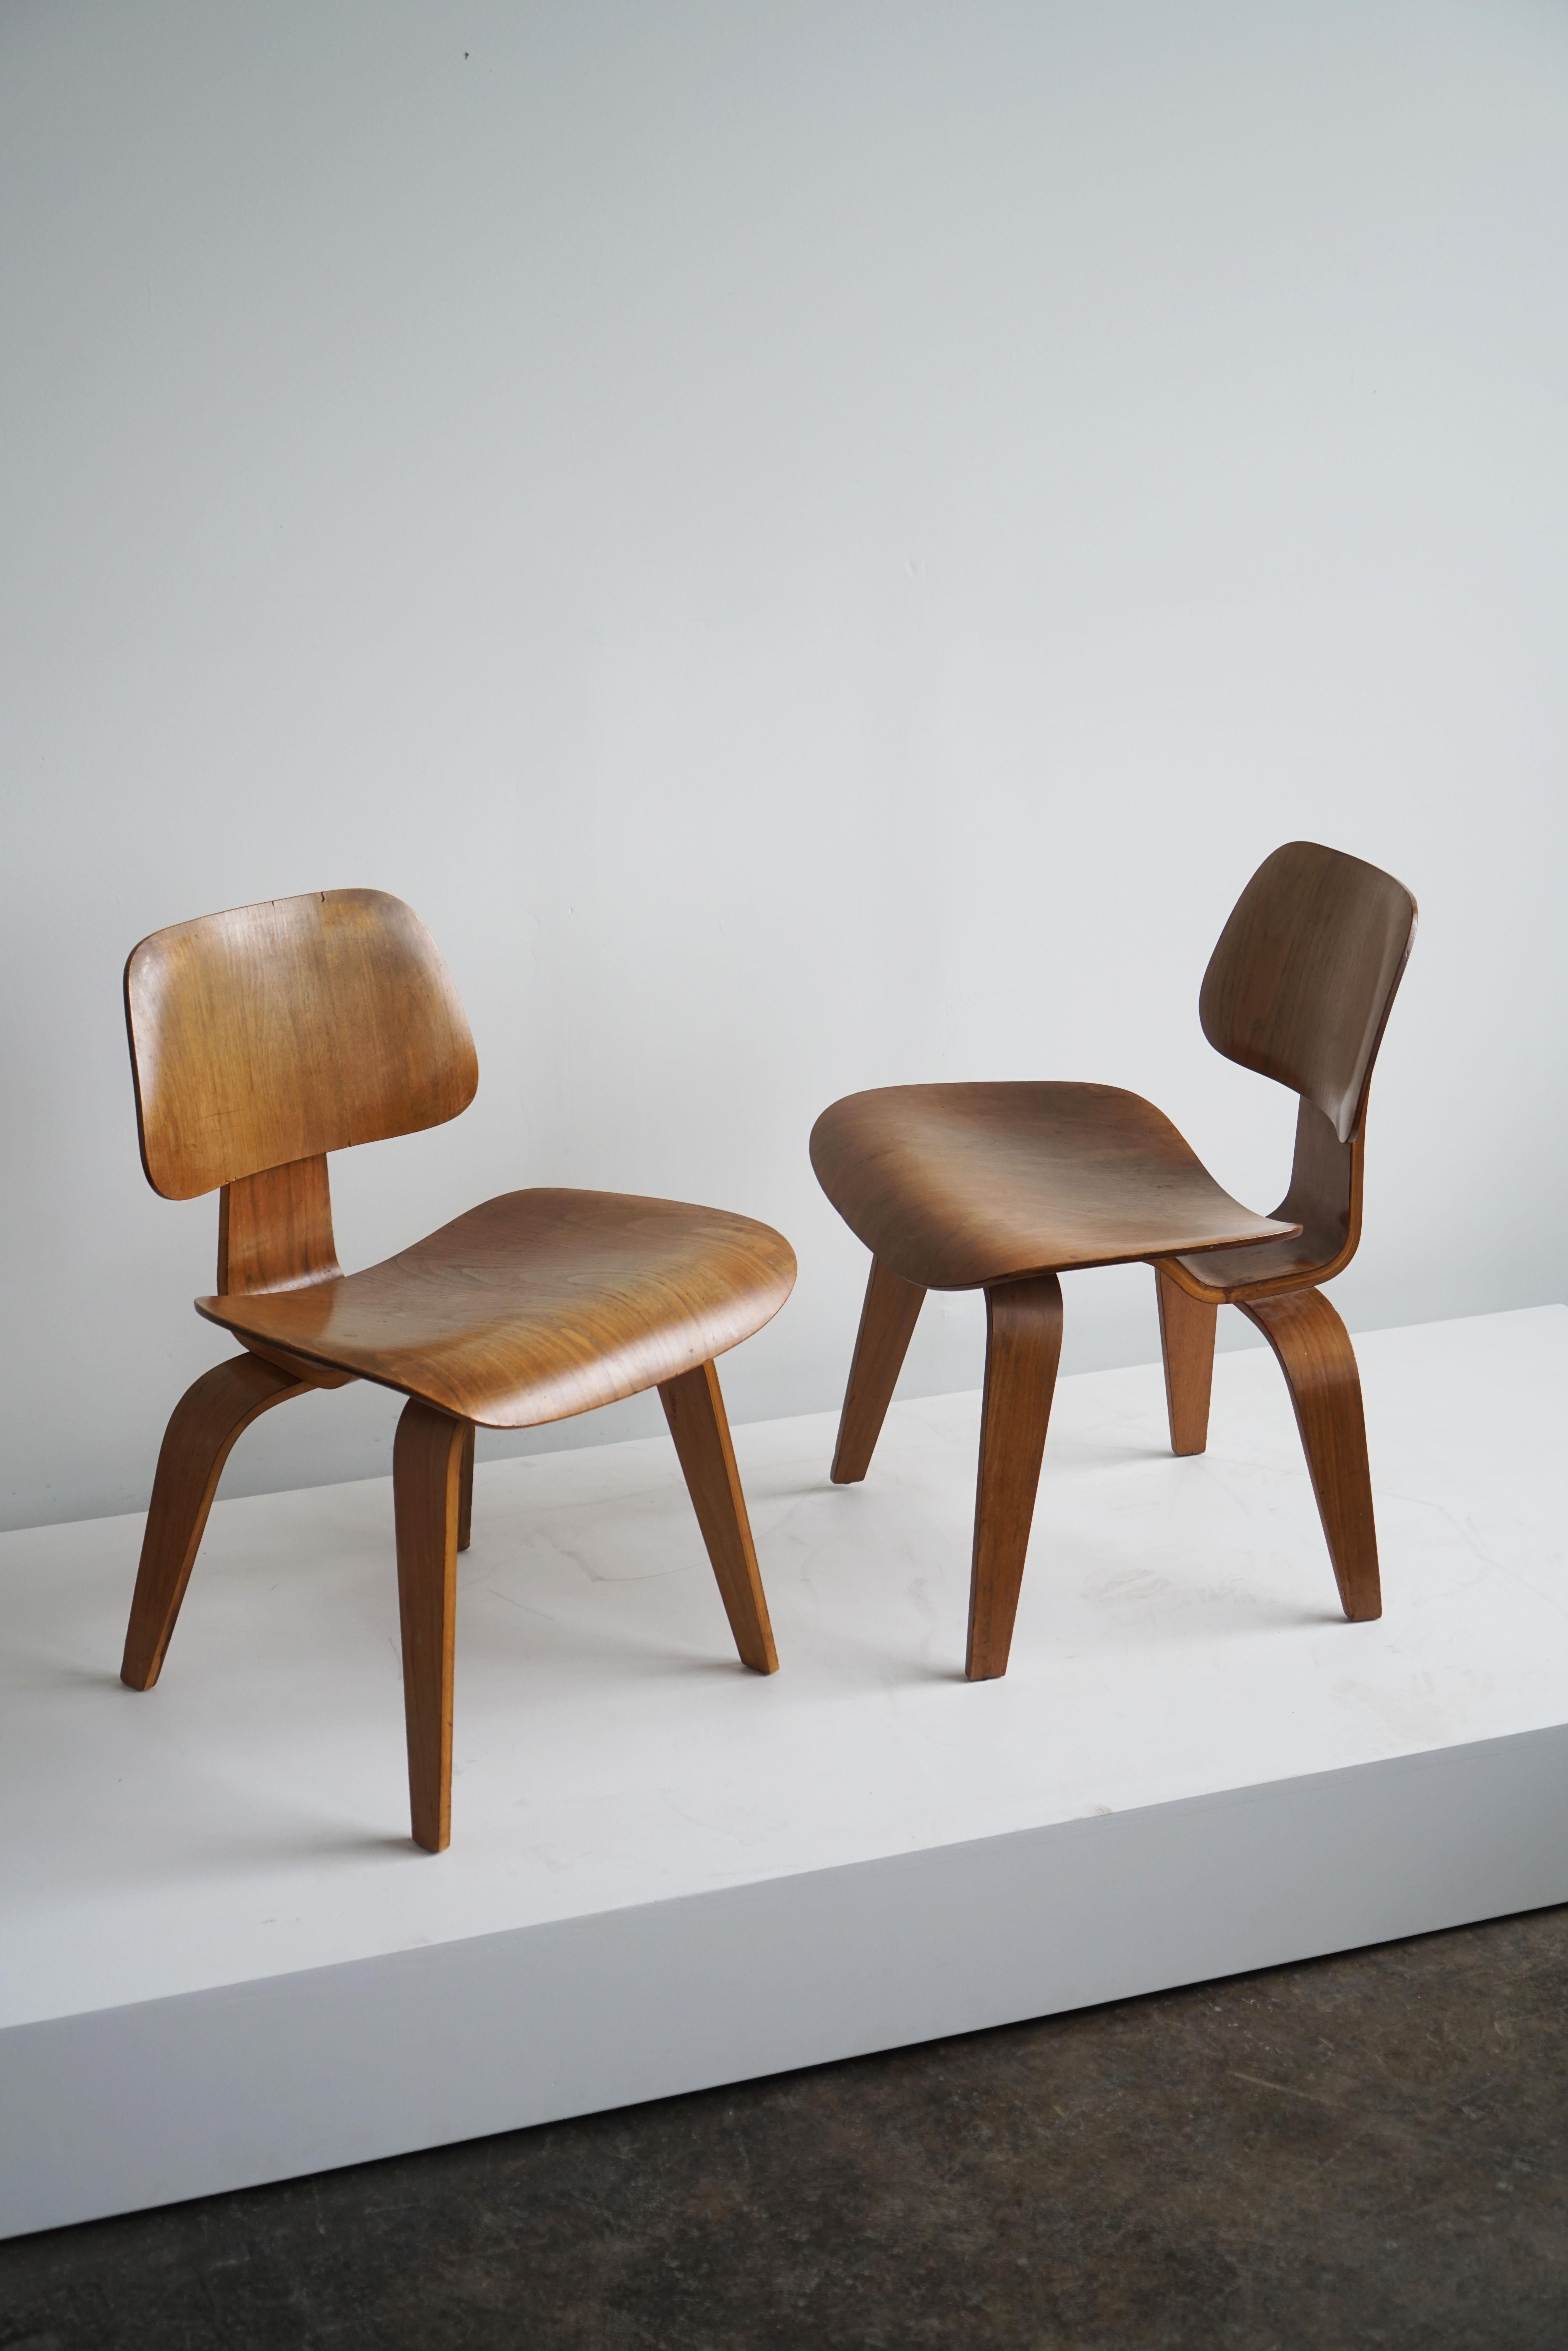 Charles and Ray Eames, 
DCW plywood chairs, pair.

Herman Miller, USA
Circa 1950
Walnut plywood.

These chairs are 2nd generation (1st generation Herman Miller) as identified by the 5-2-4 screw pattern on the base and the rounded feet.

The